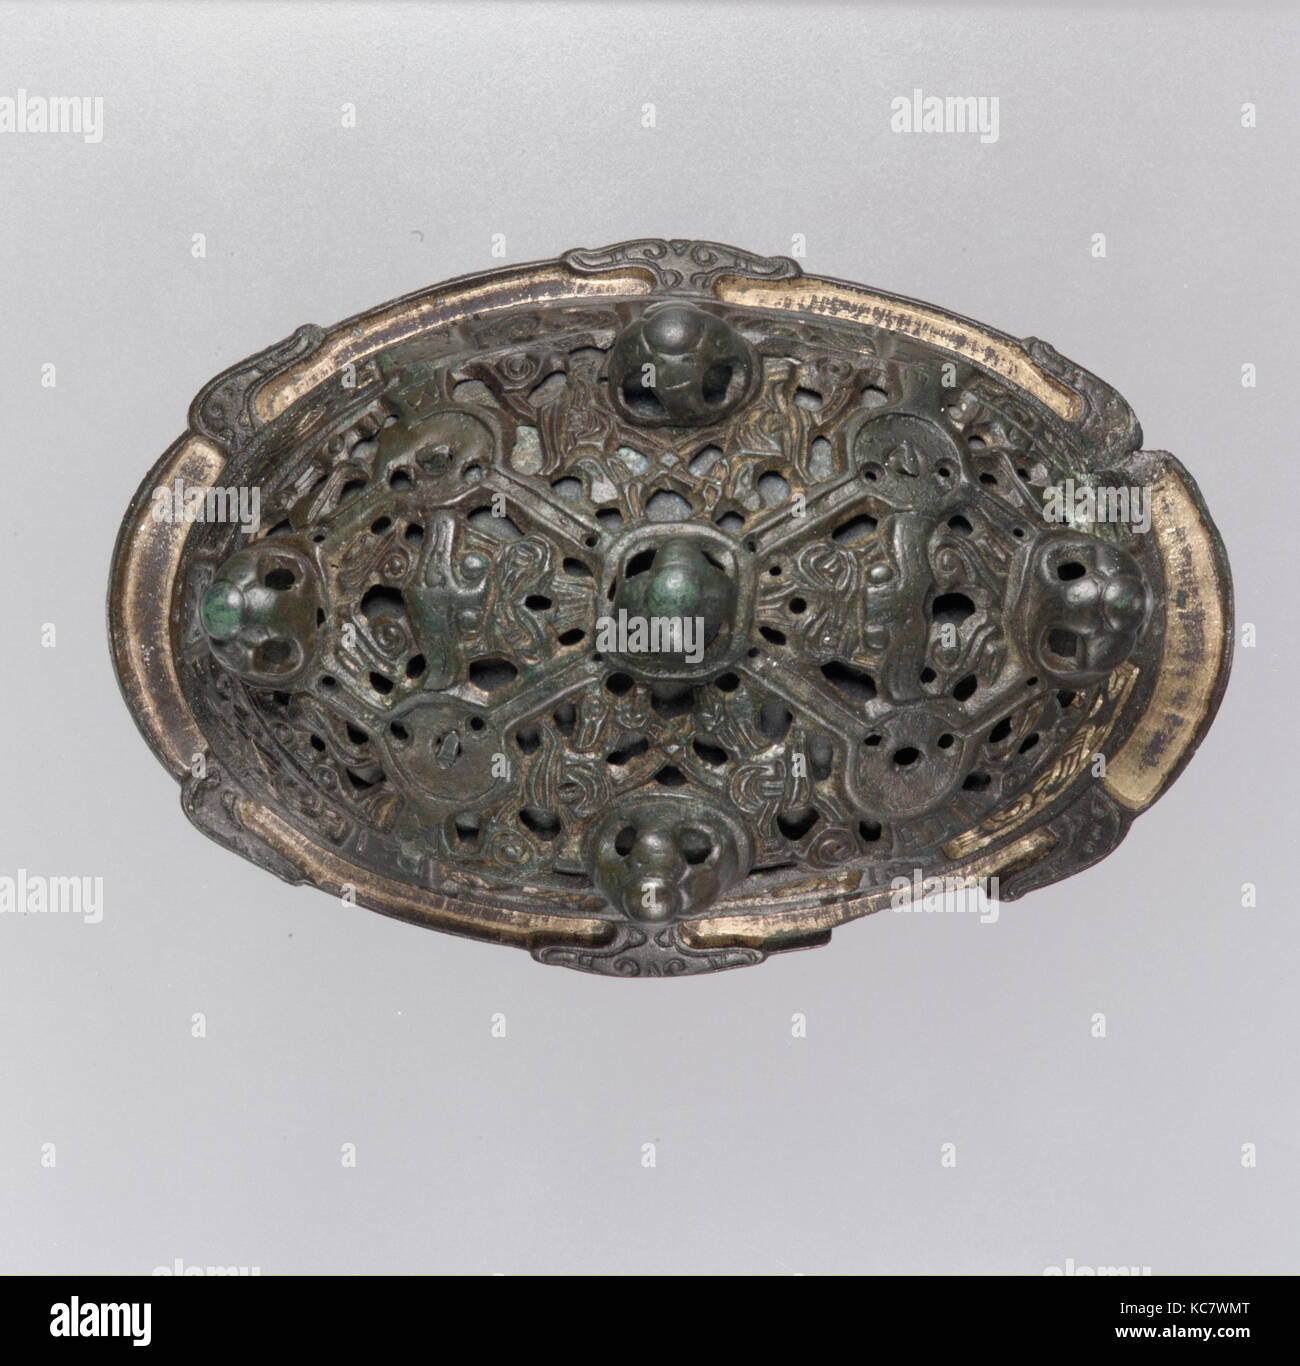 Oval Brooch, 900–1000, Made in Scandinavia, Viking, Copper alloy, gilt, Overall: 4 1/2 x 2 15/16 x 1 11/16 x 4 1/2 in. (11.4 x 7 Stock Photo